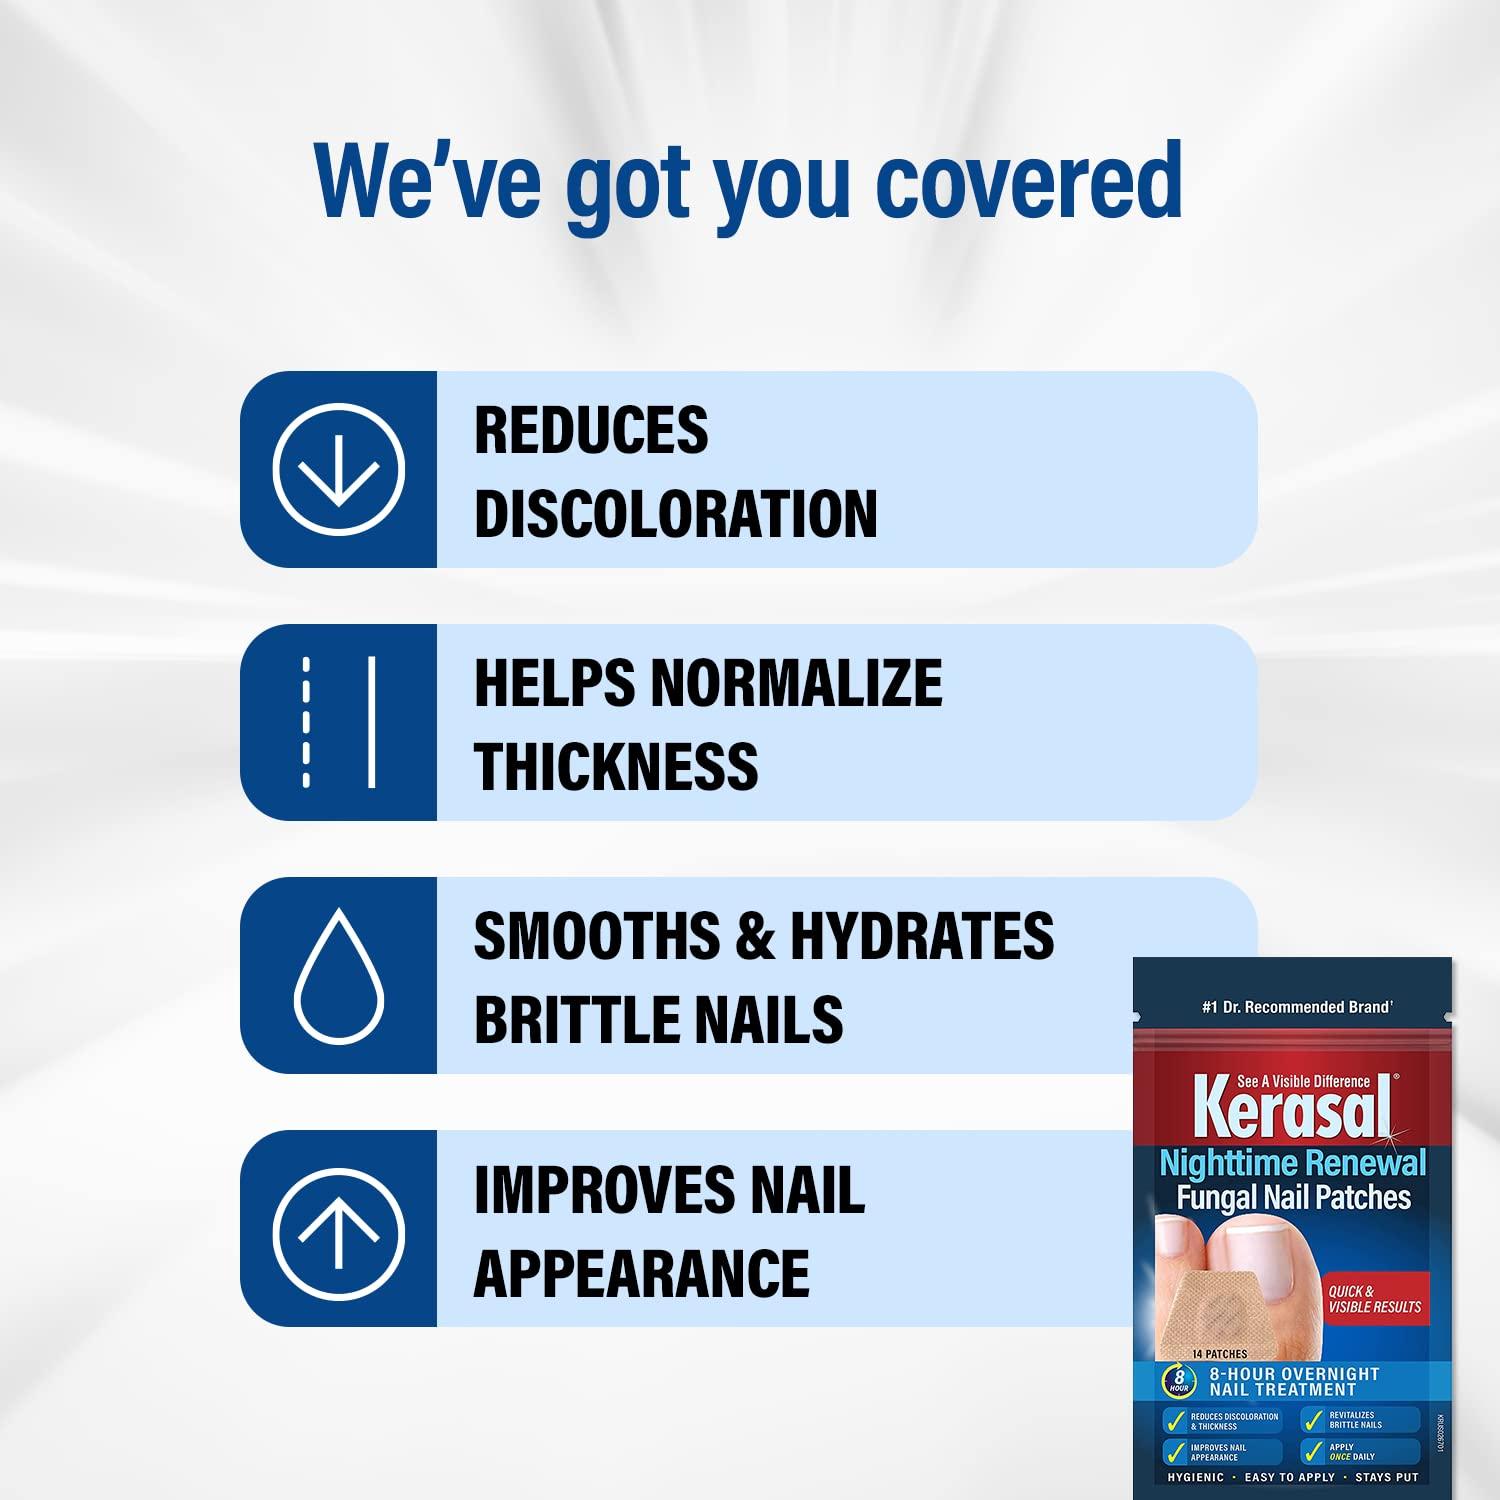 Kerasal Kerasal Nail Fungal Nail Renewal Treatment| Buy Indian Products  Online - Raffeldeals| Buy India's Best Collections Online